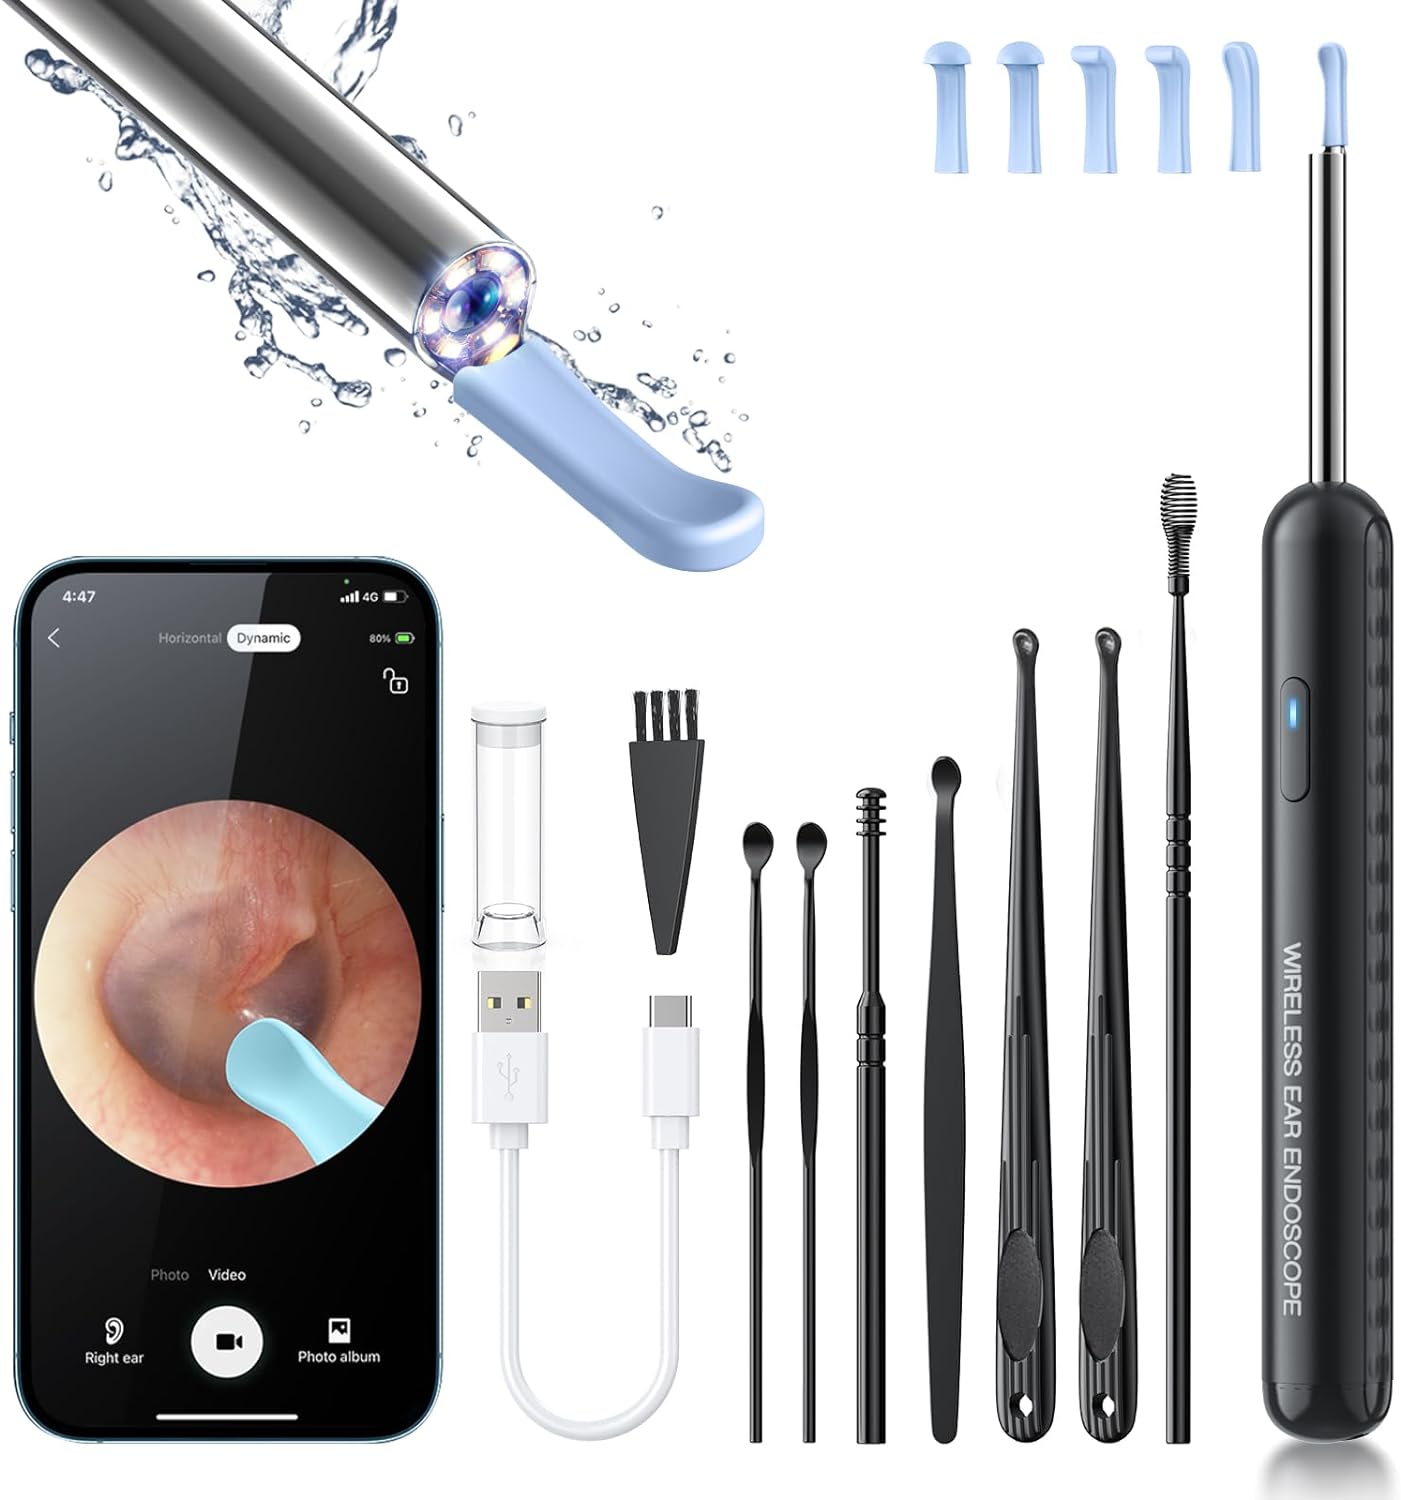 Discover Exciting Discounts: Ear Wax Removal Kit with Camera and Light - Limited Time Offer!